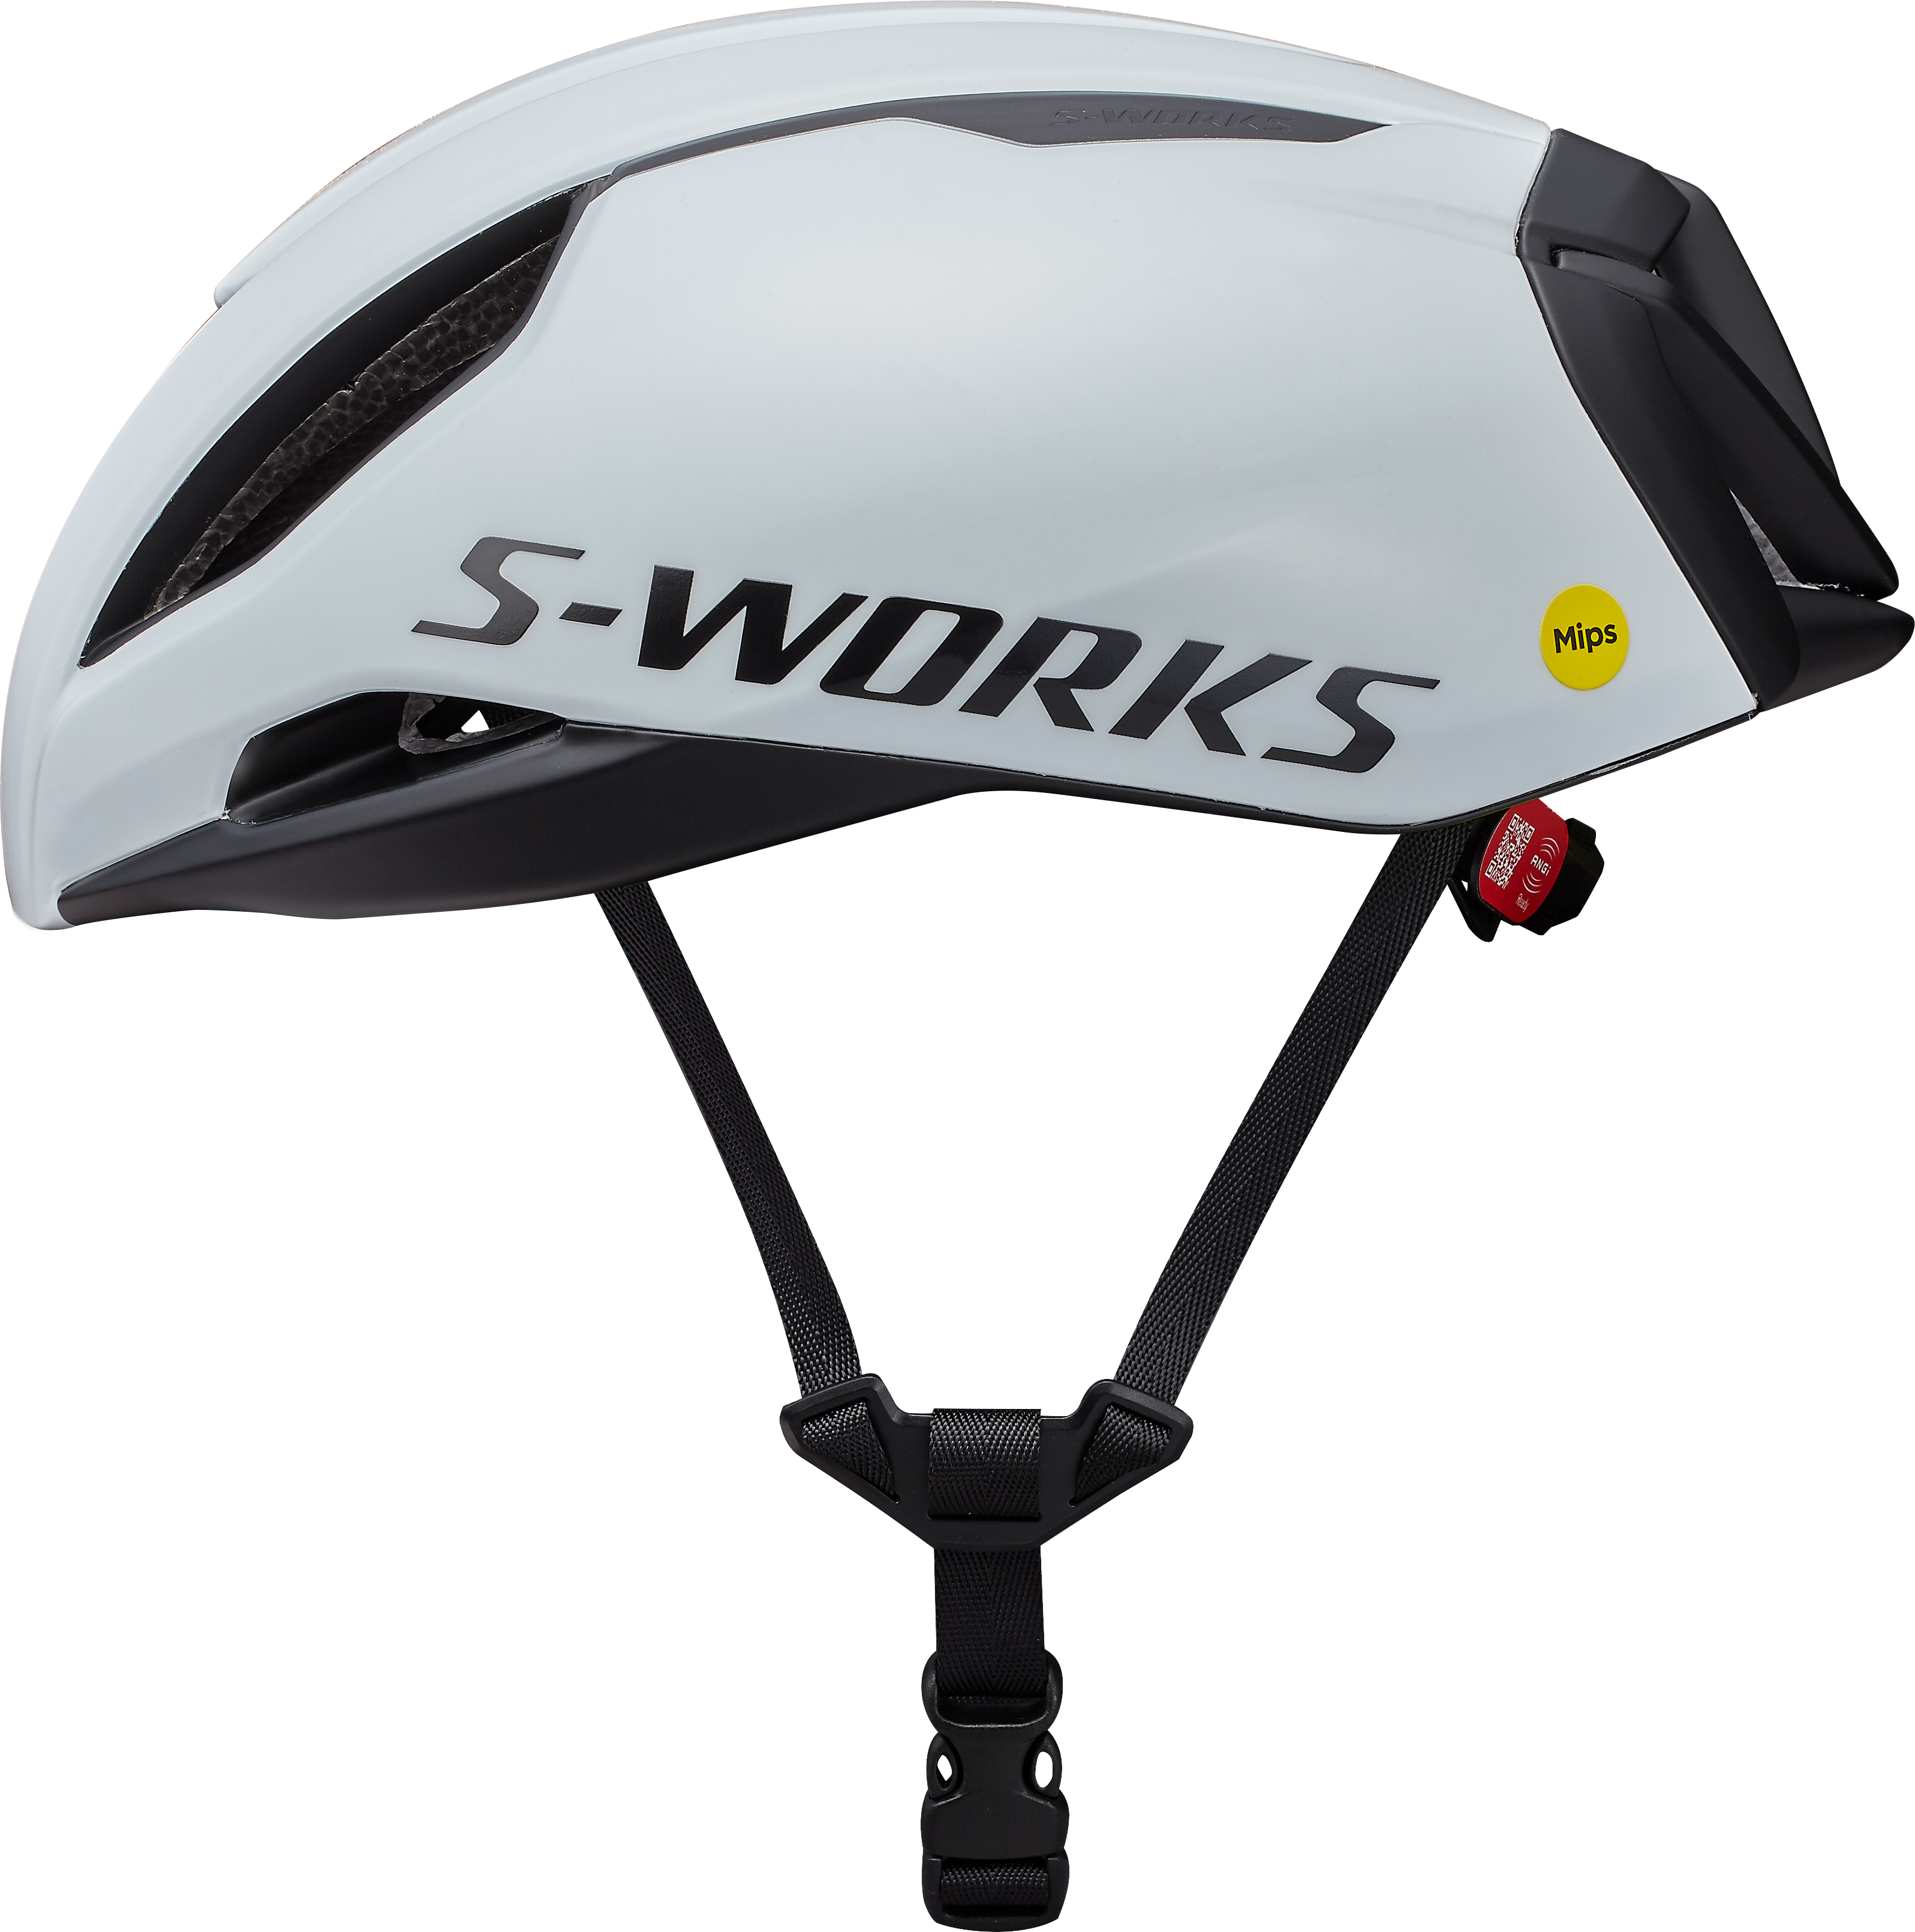 S-WORKS EVADE 3 M size